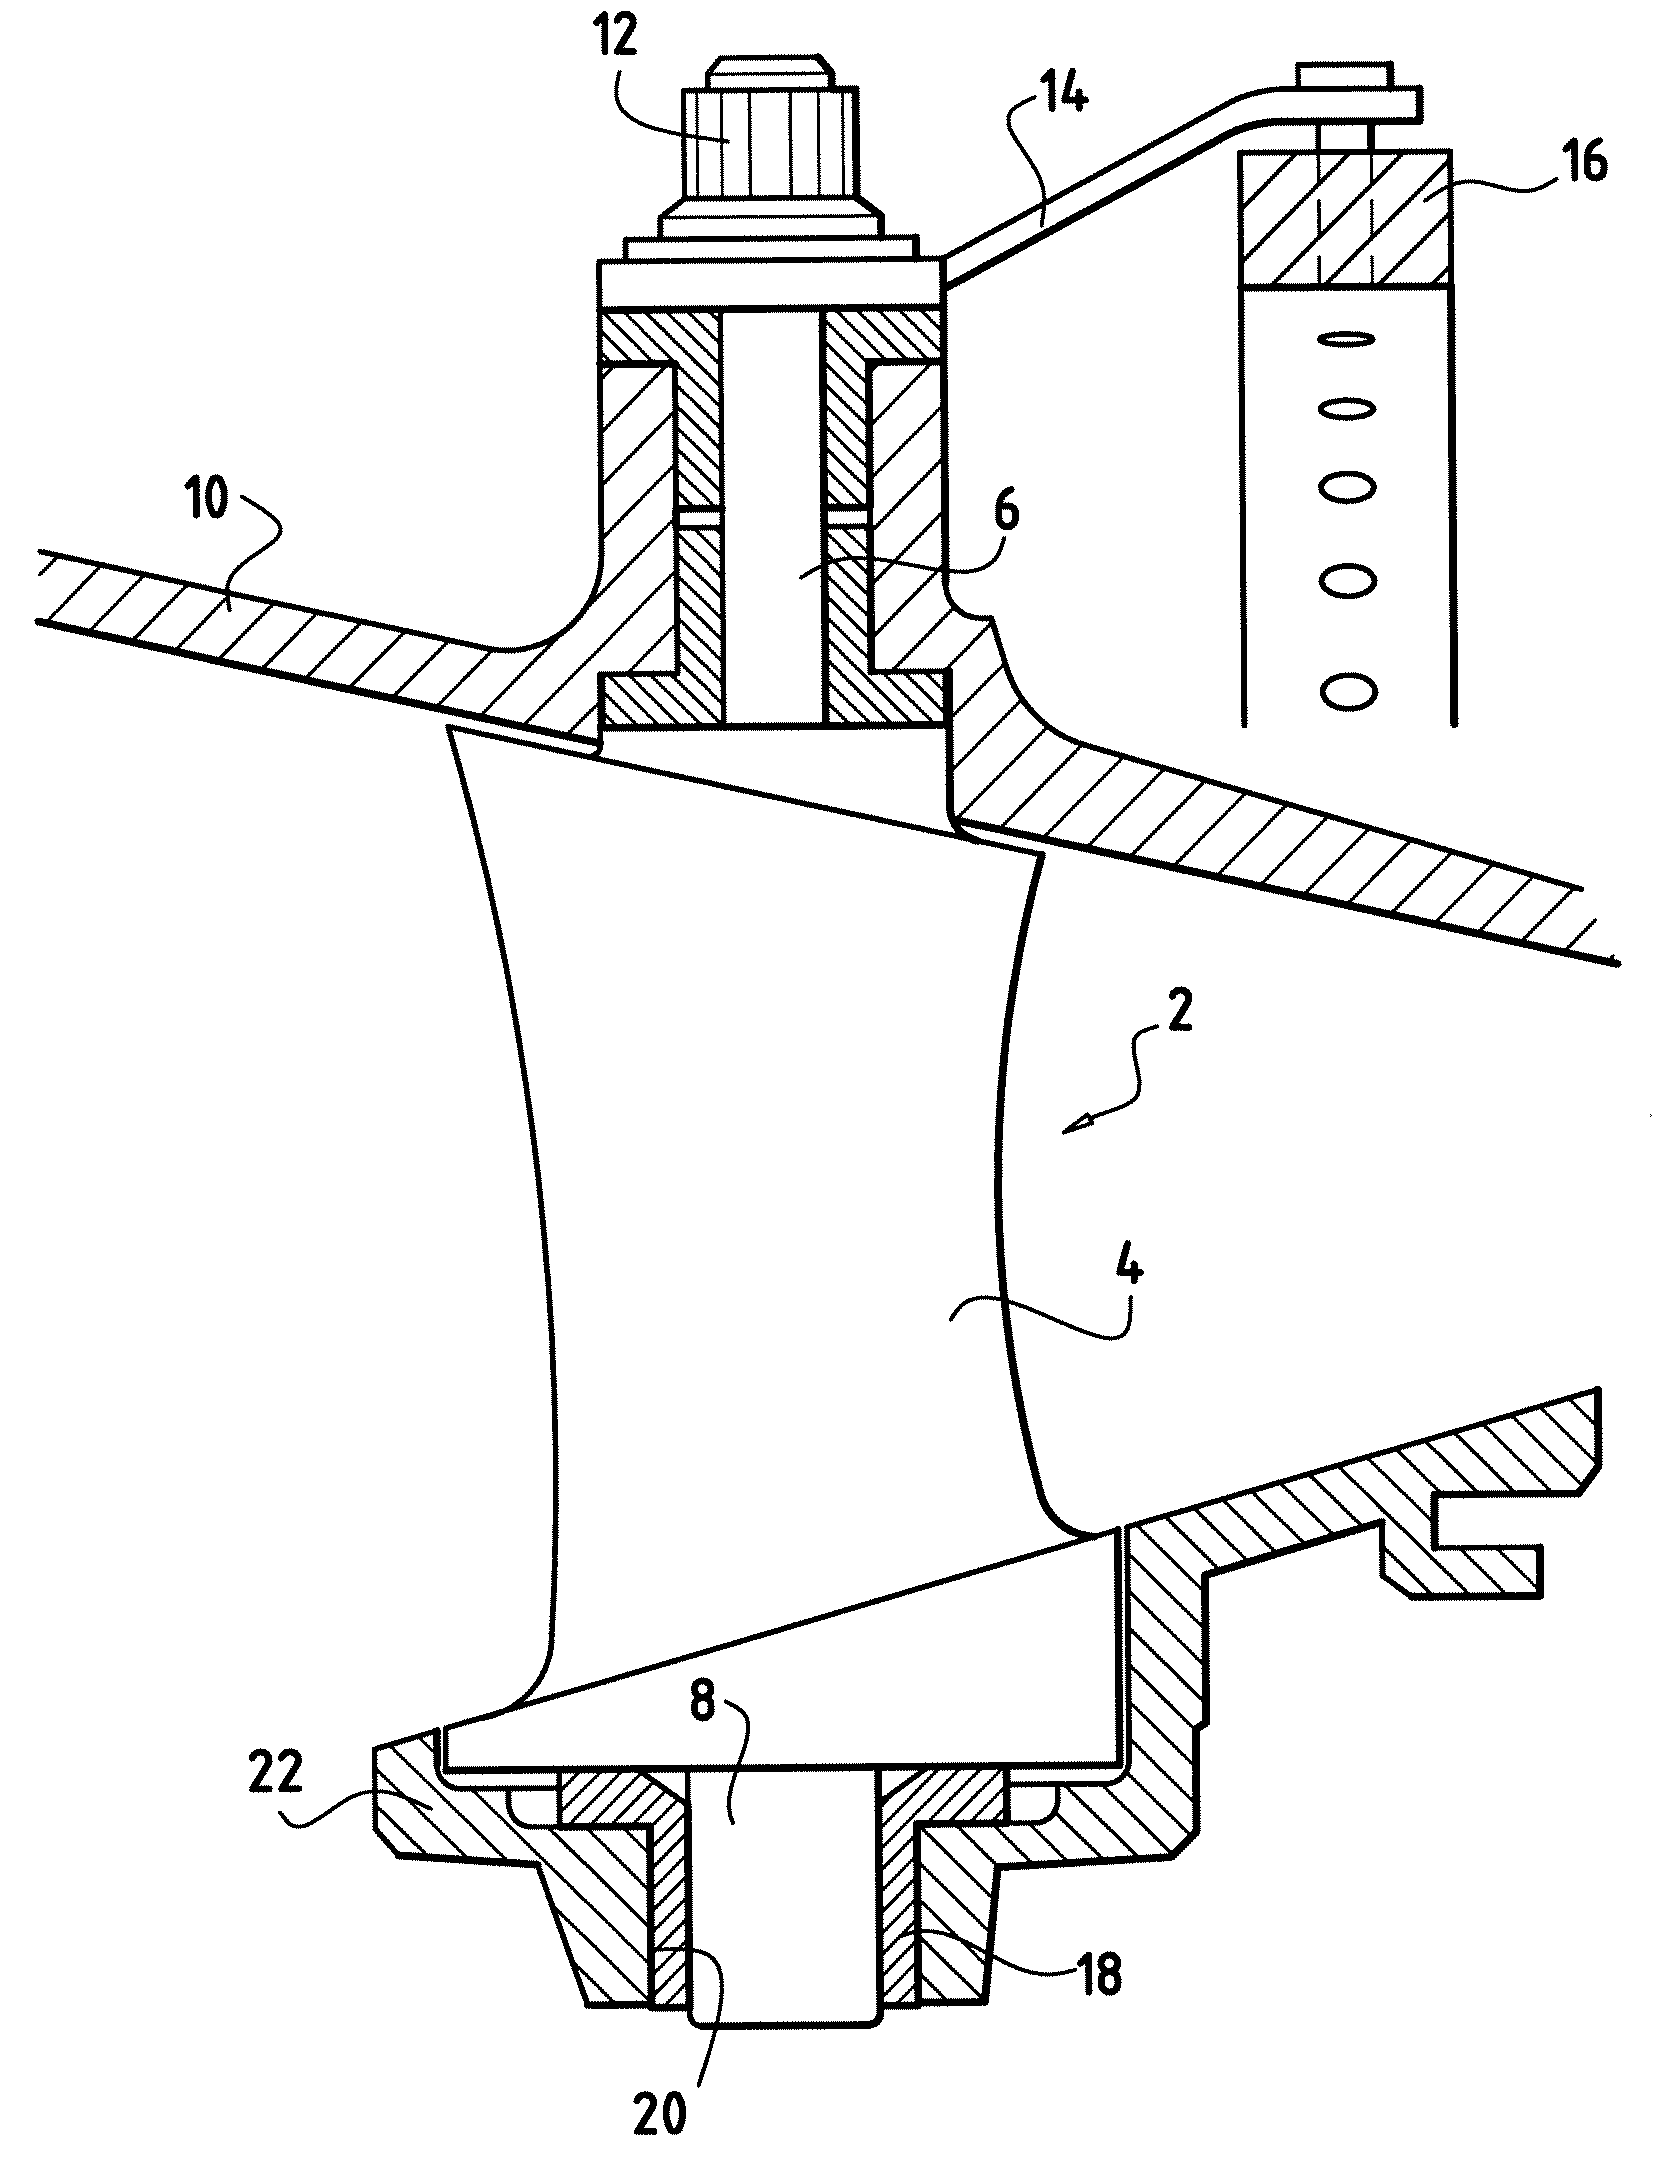 Anti-wear device for a guide pivot of a variable-pitch vane of a turbomachine compressor